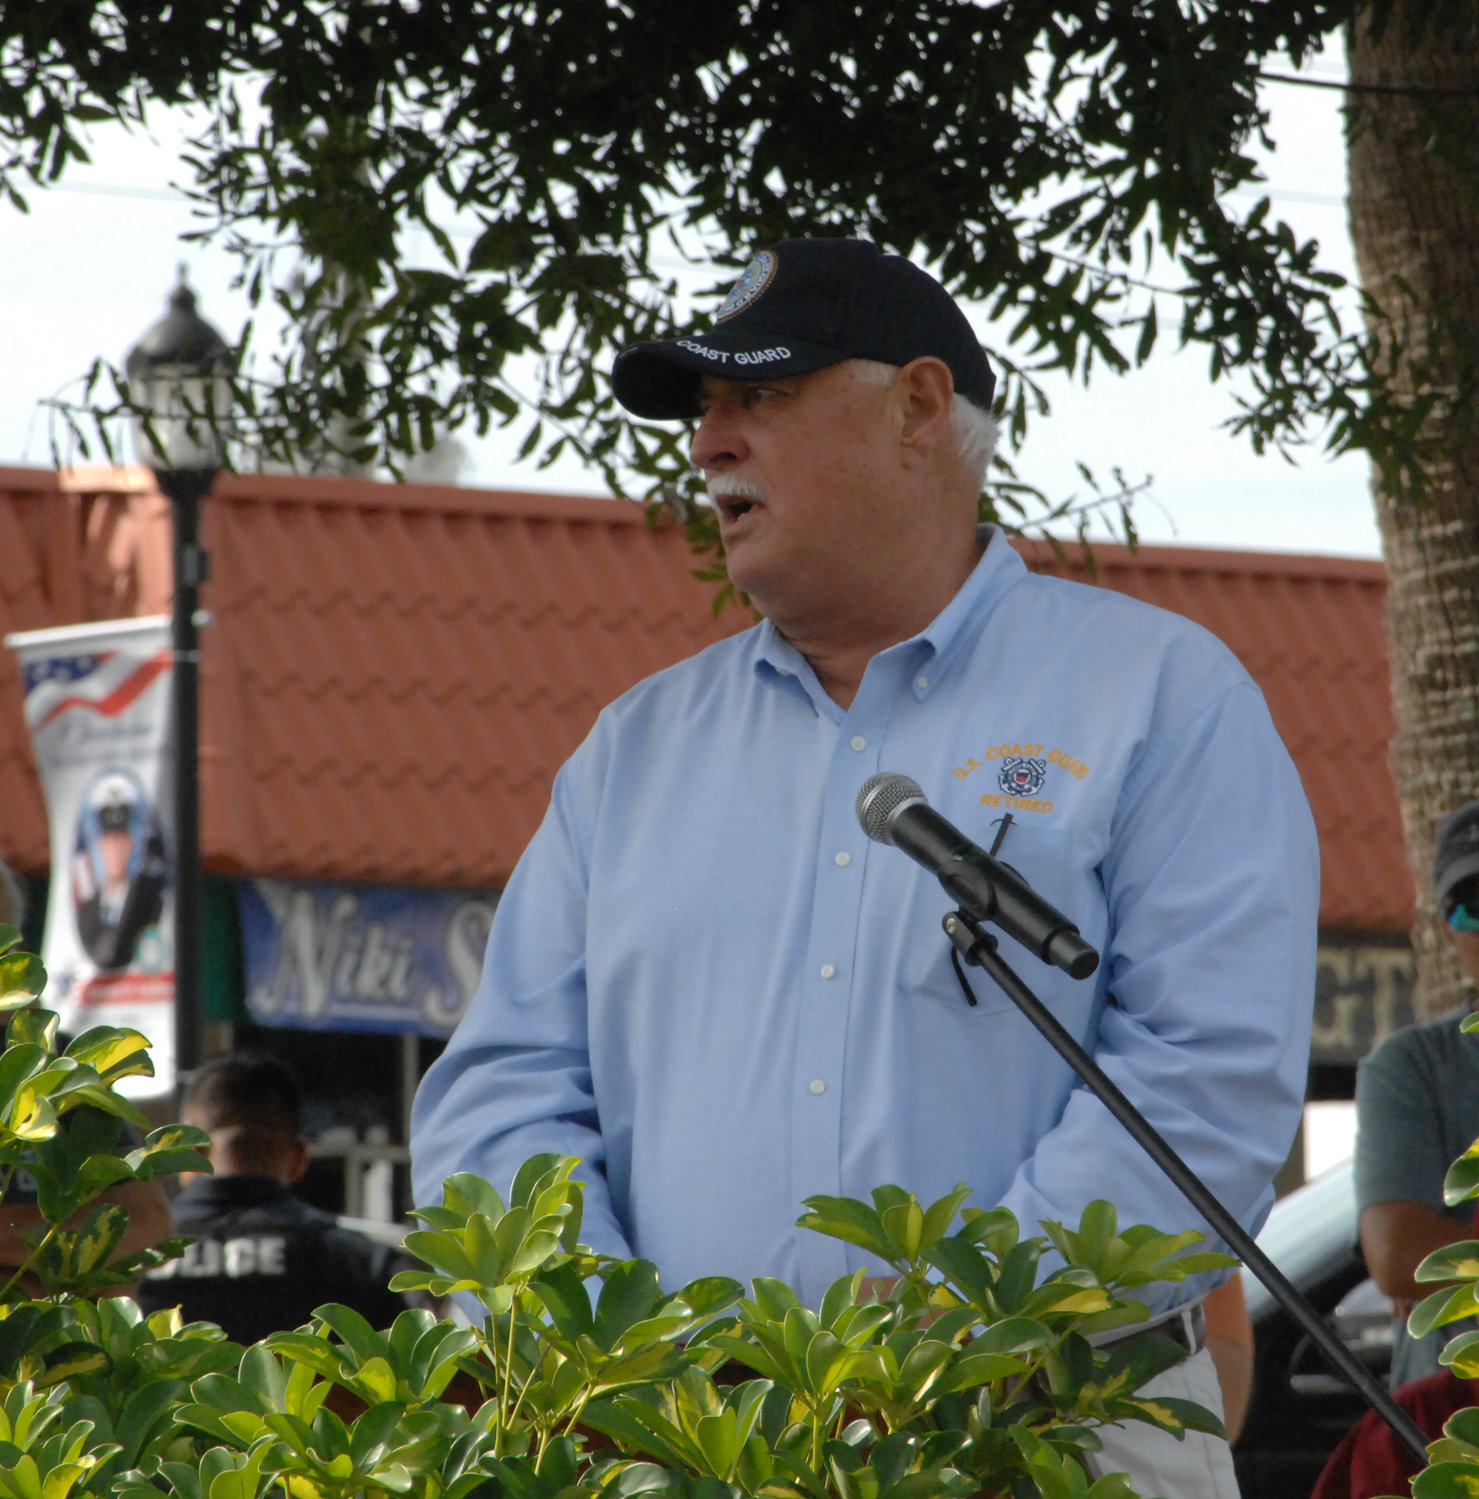 Rear Admiral James W. Underwood, United States Coast Guard, was the guest speaker for the Veterans Day program in Flagler Park on Nov. 11/